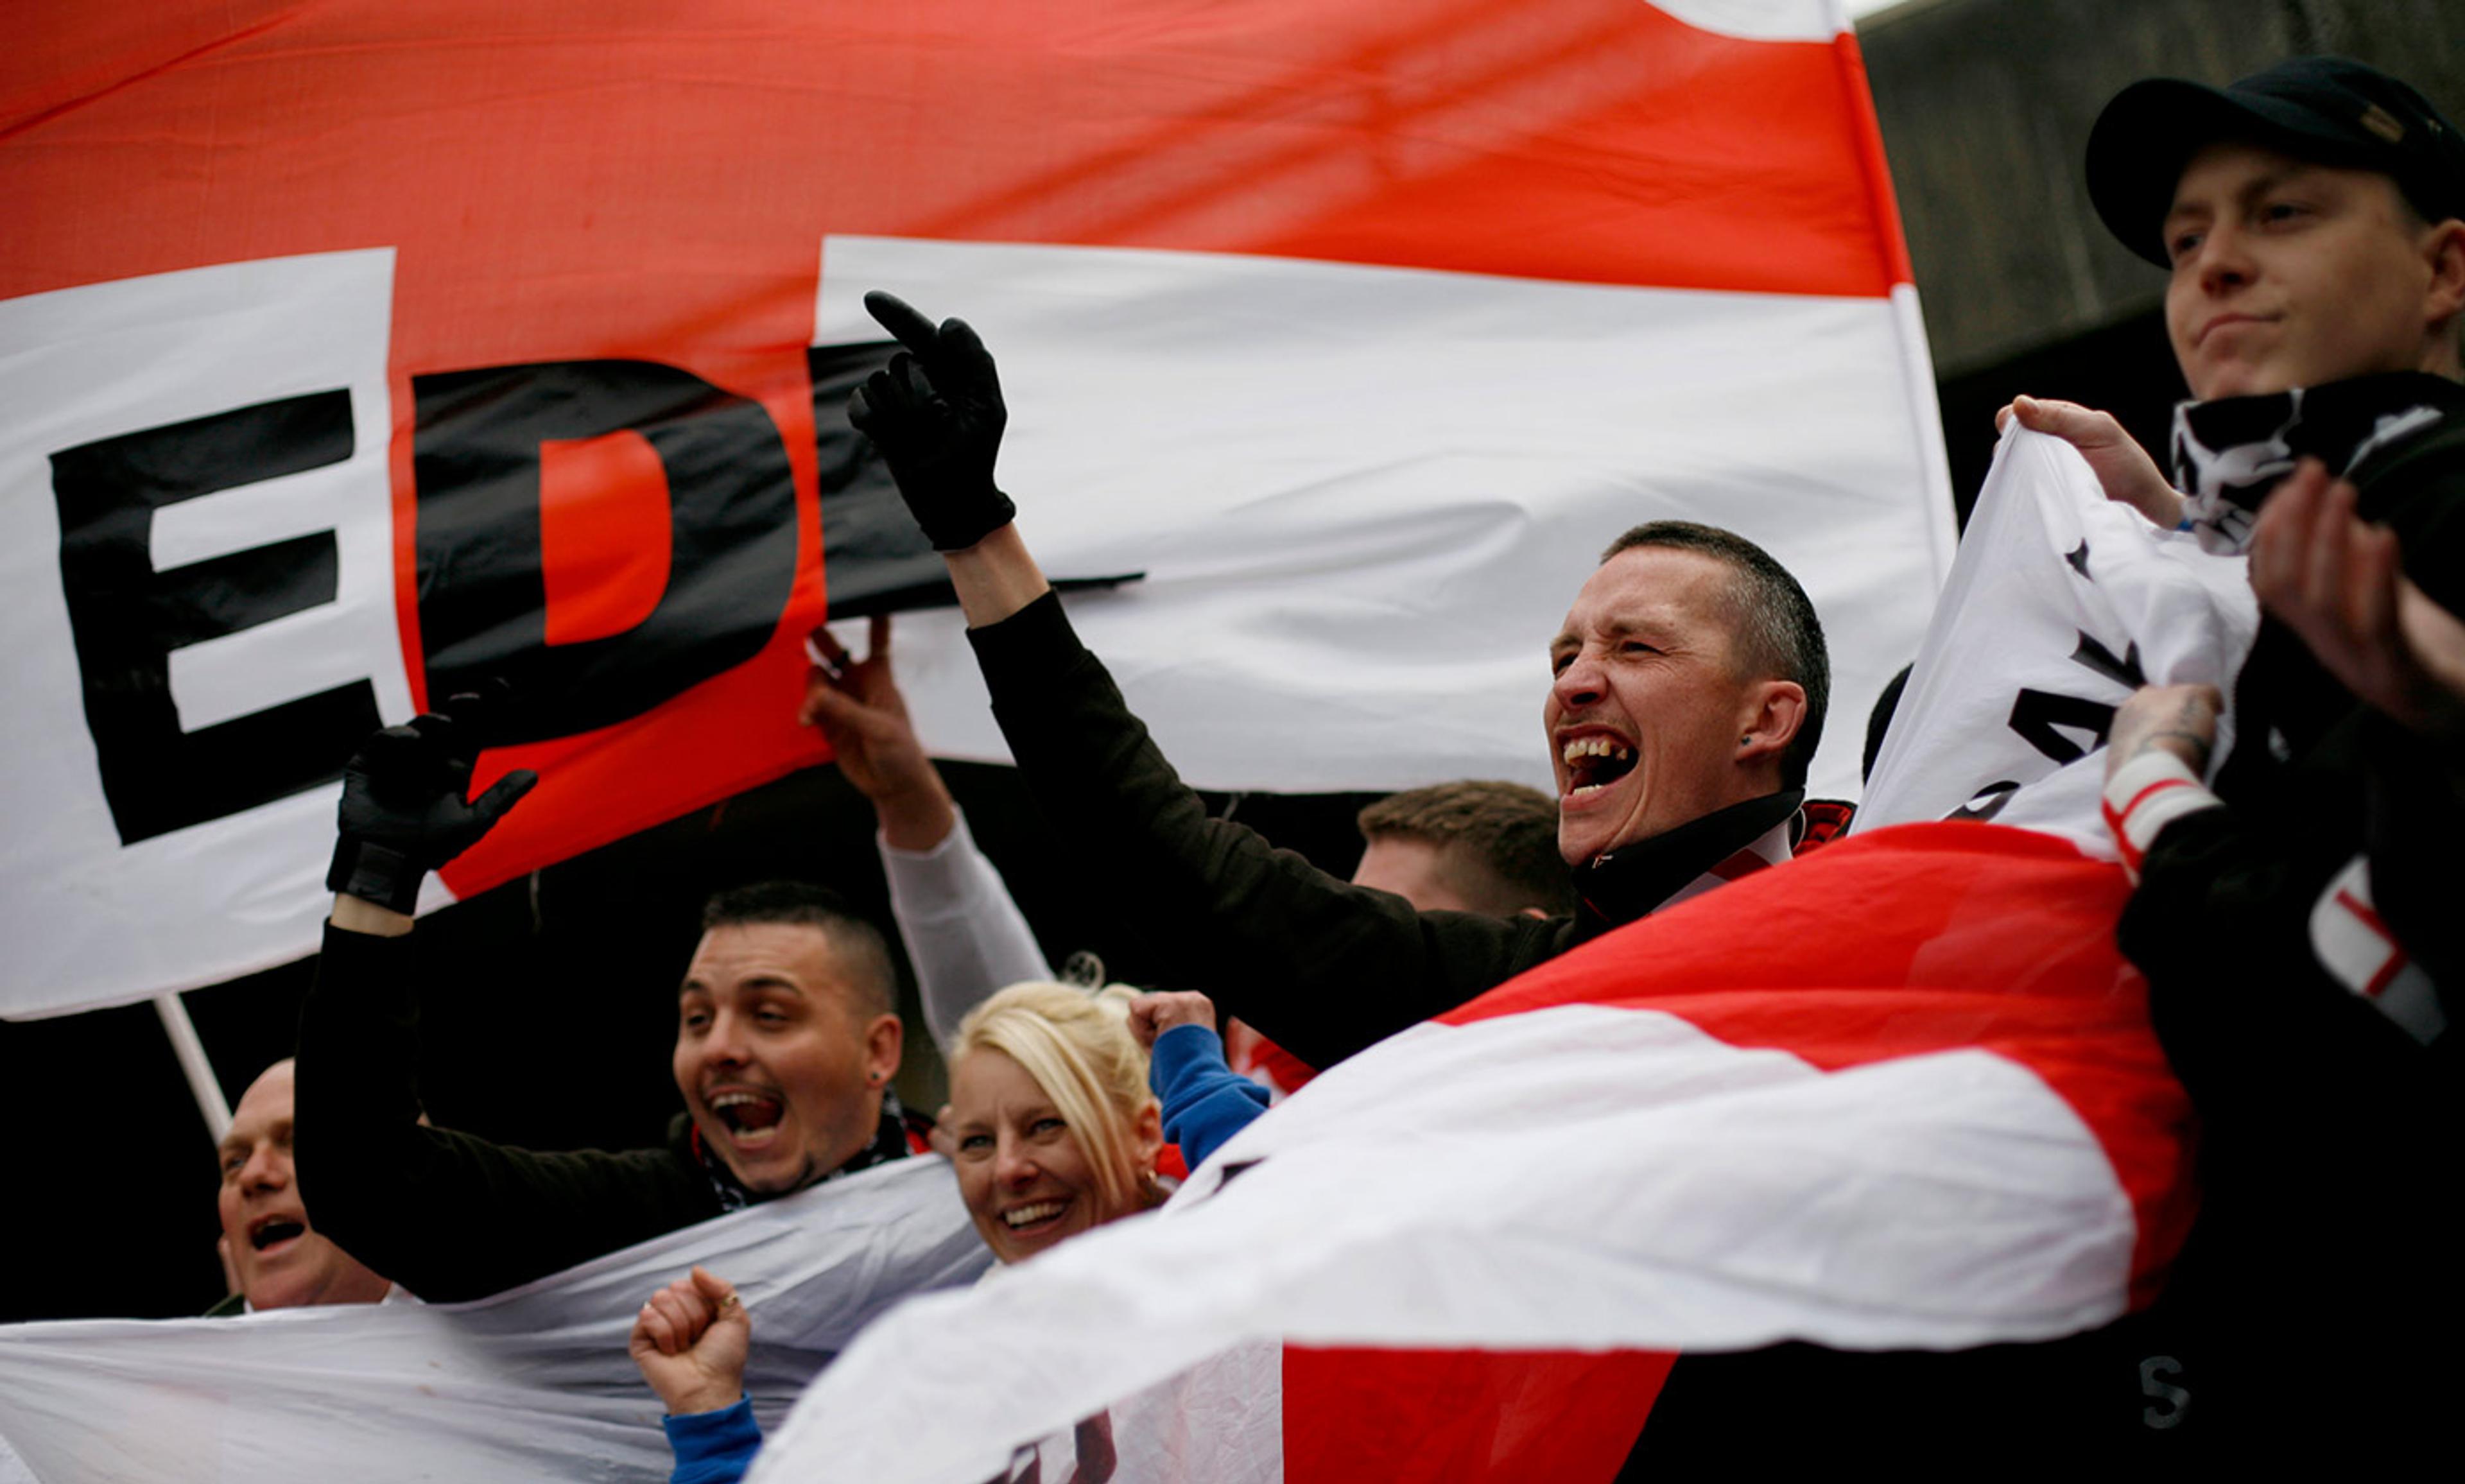 <p>Members of the far-Right English Defence League protest in Luton, UK, in 2012. <em>Photo by Tal Cohen/AFP/Getty</em></p>